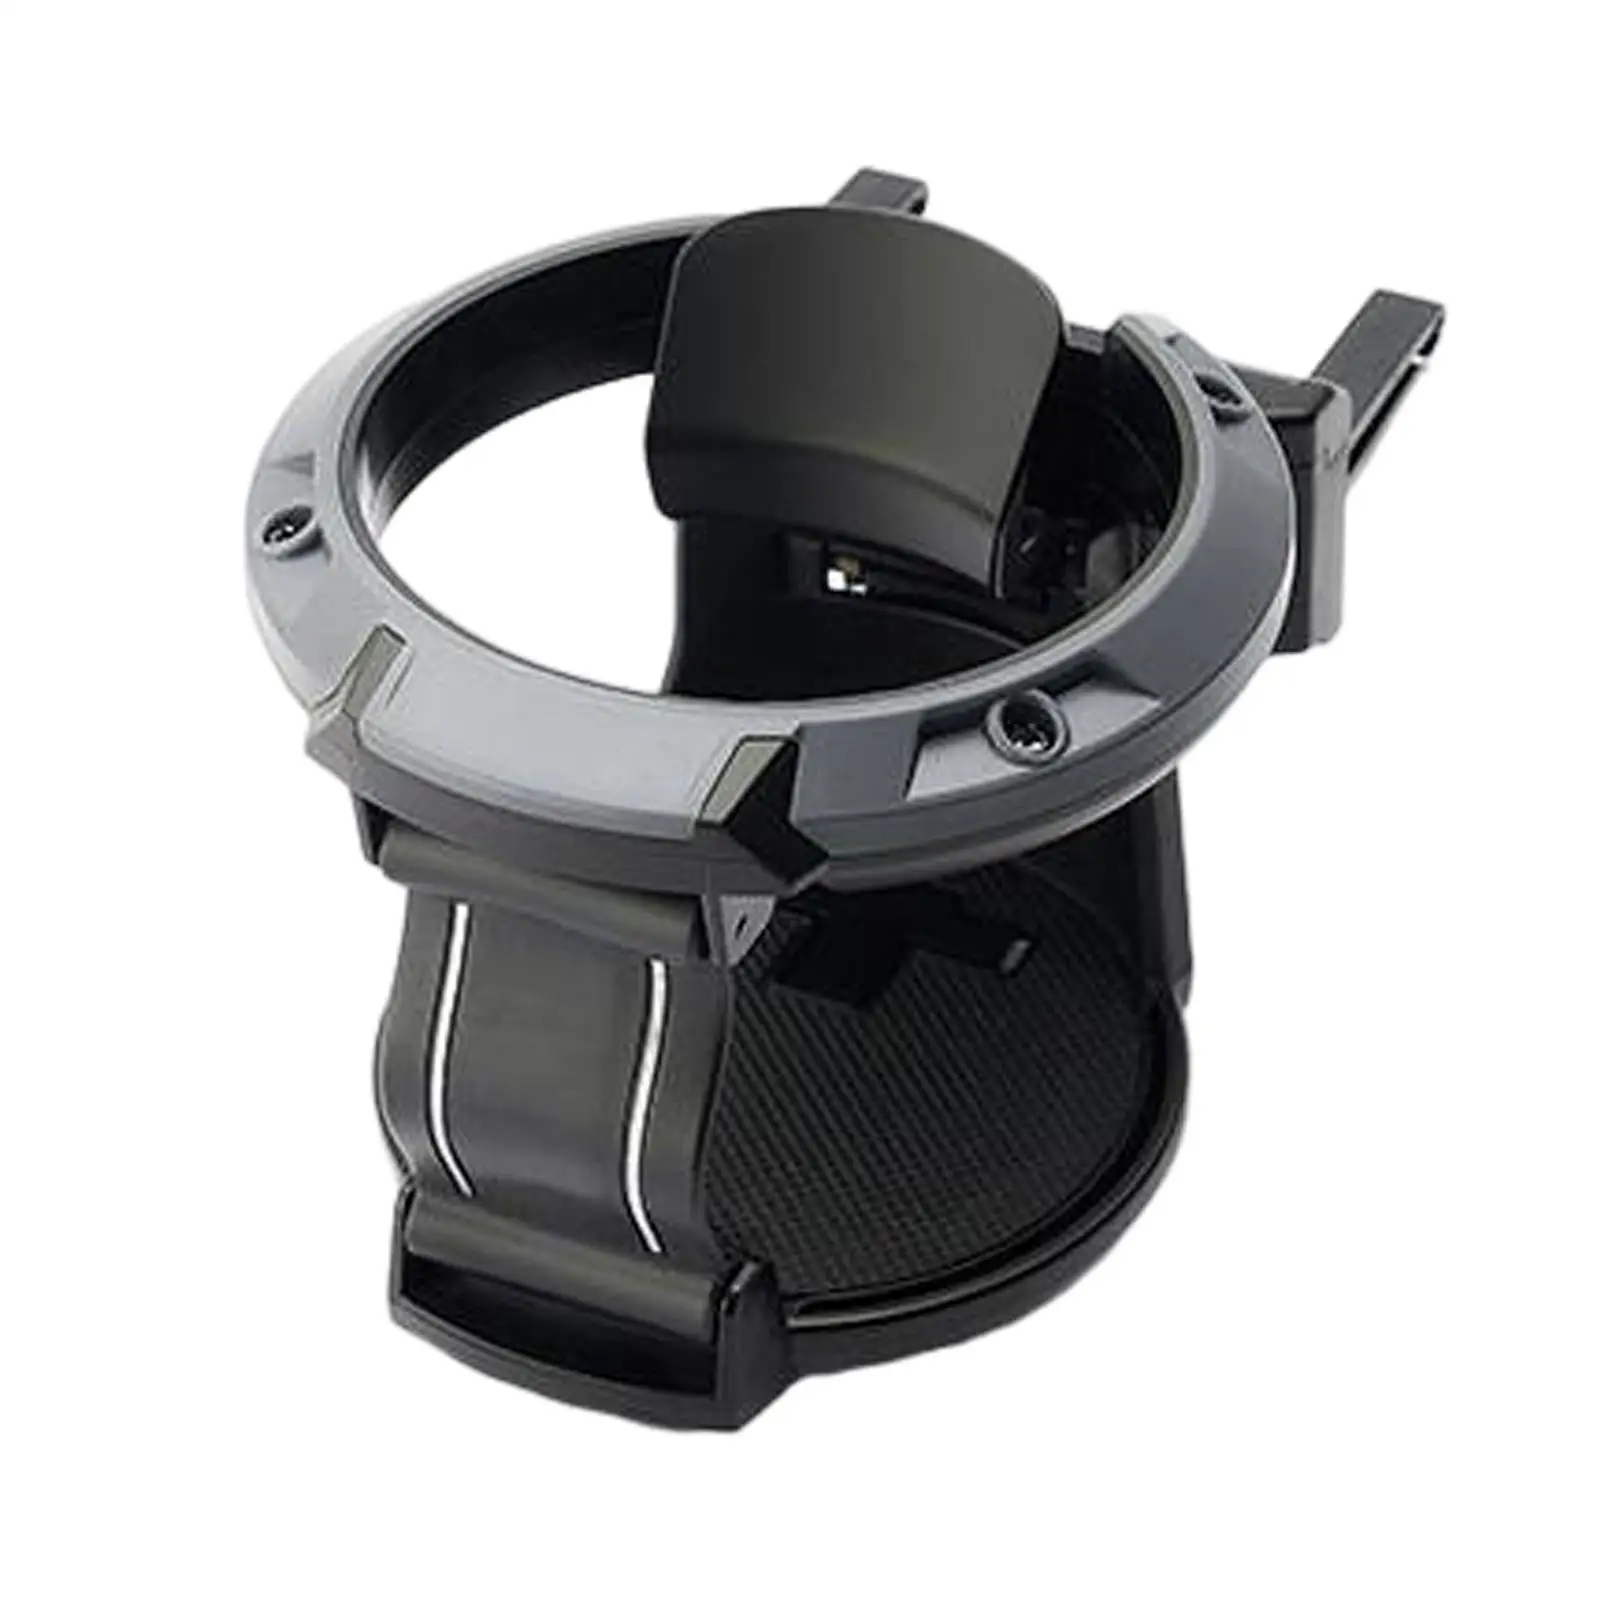 cup Holder with Additional Hook for Automobile Truck Accessories